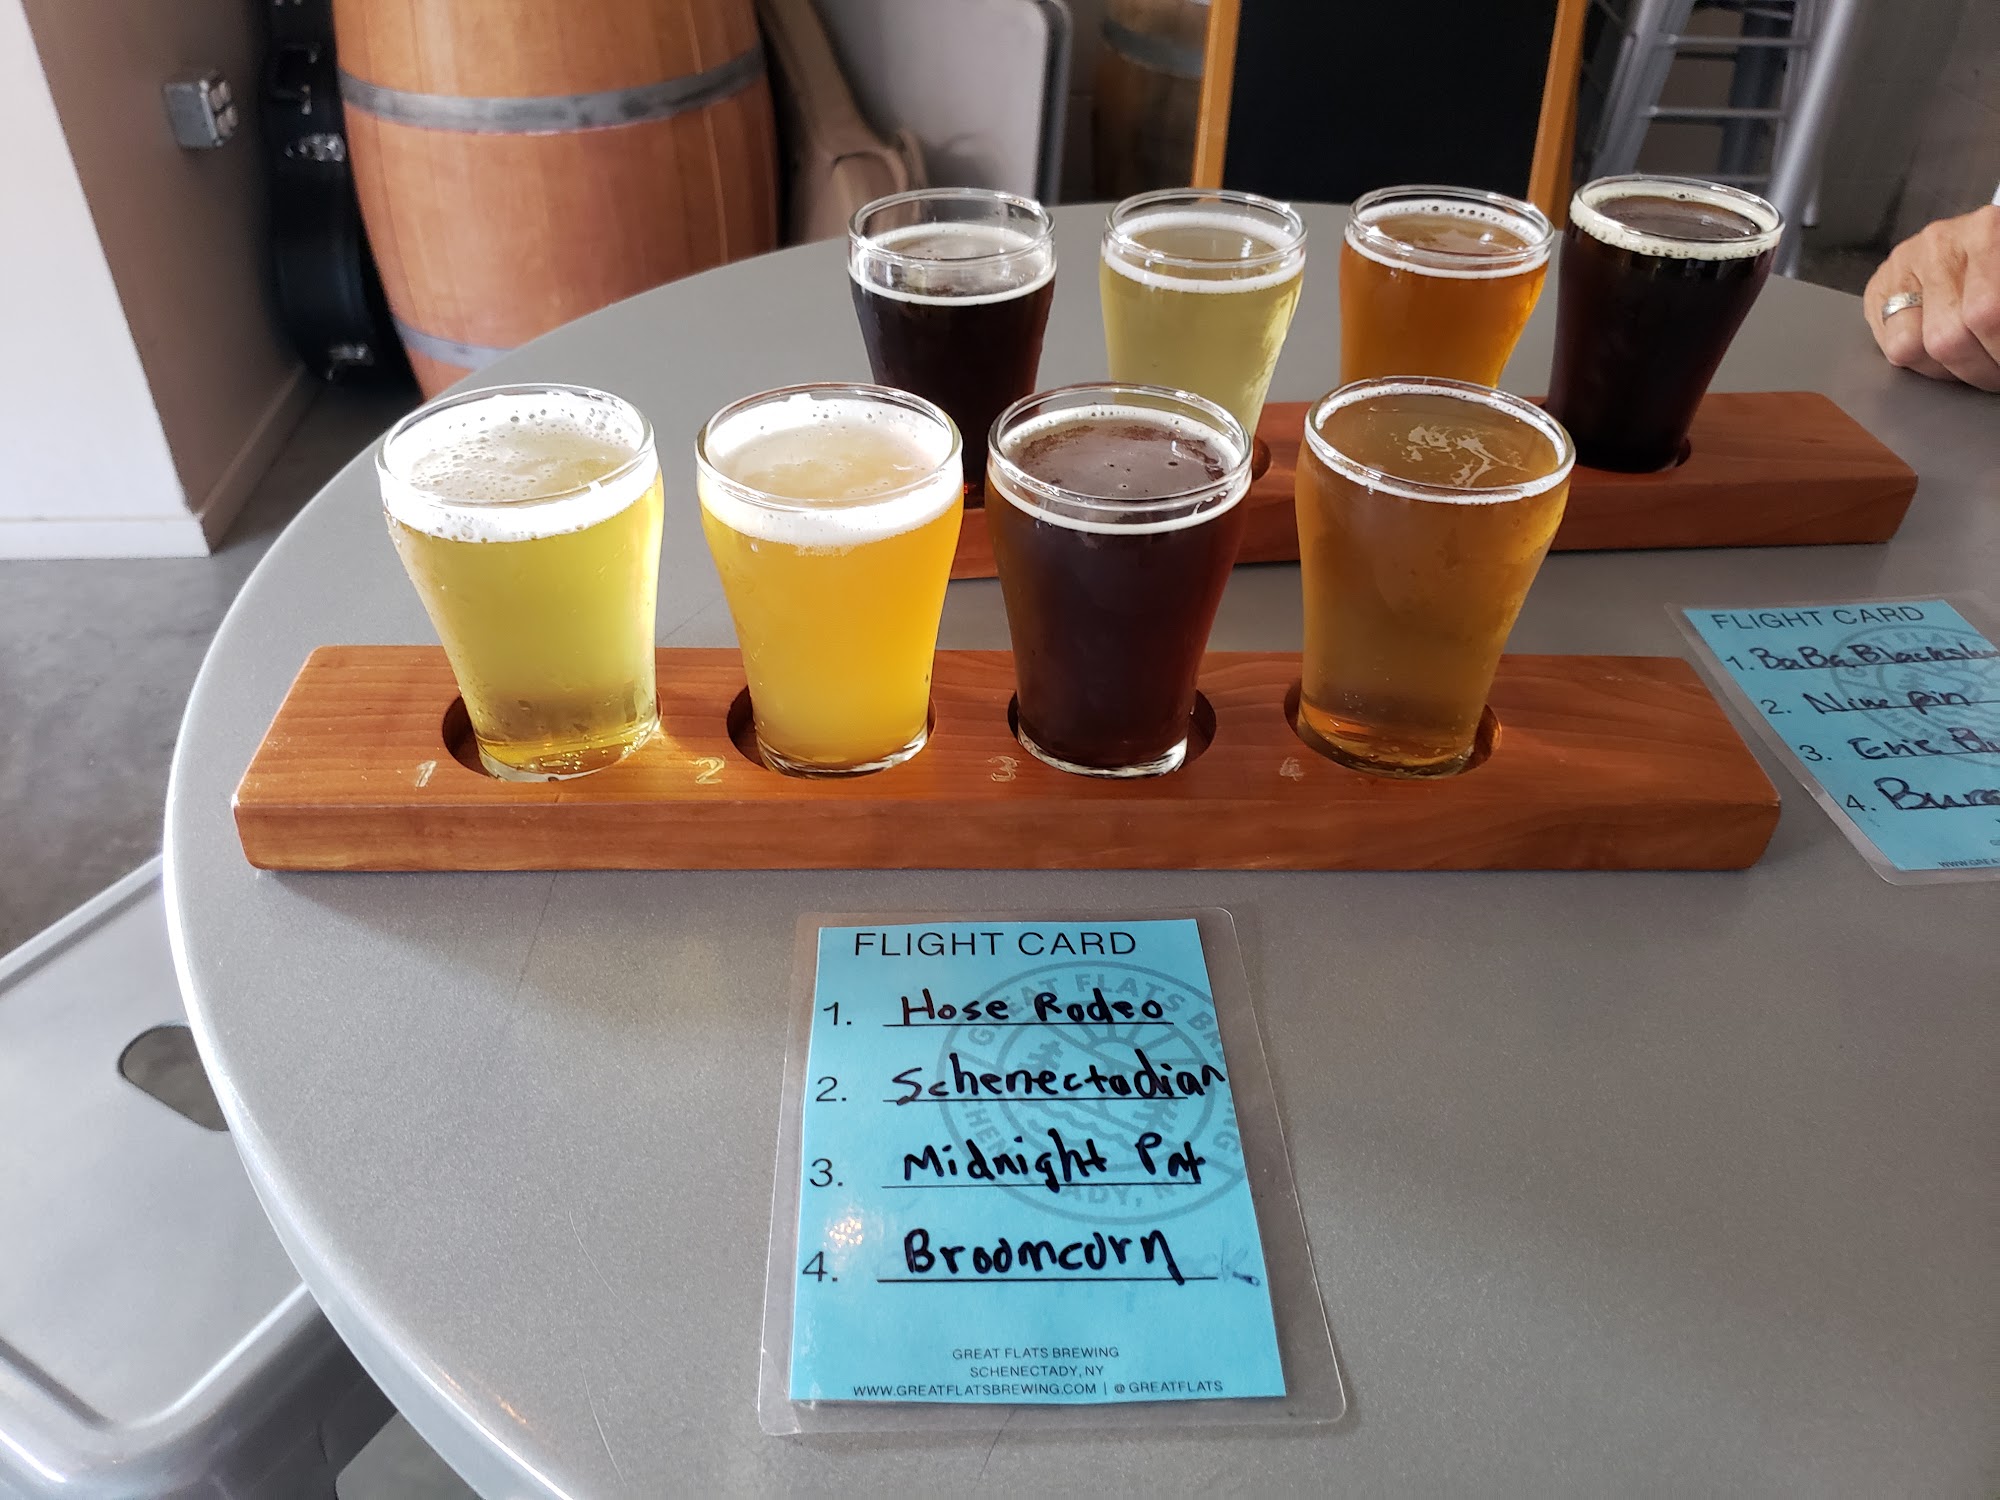 Great Flats Brewing